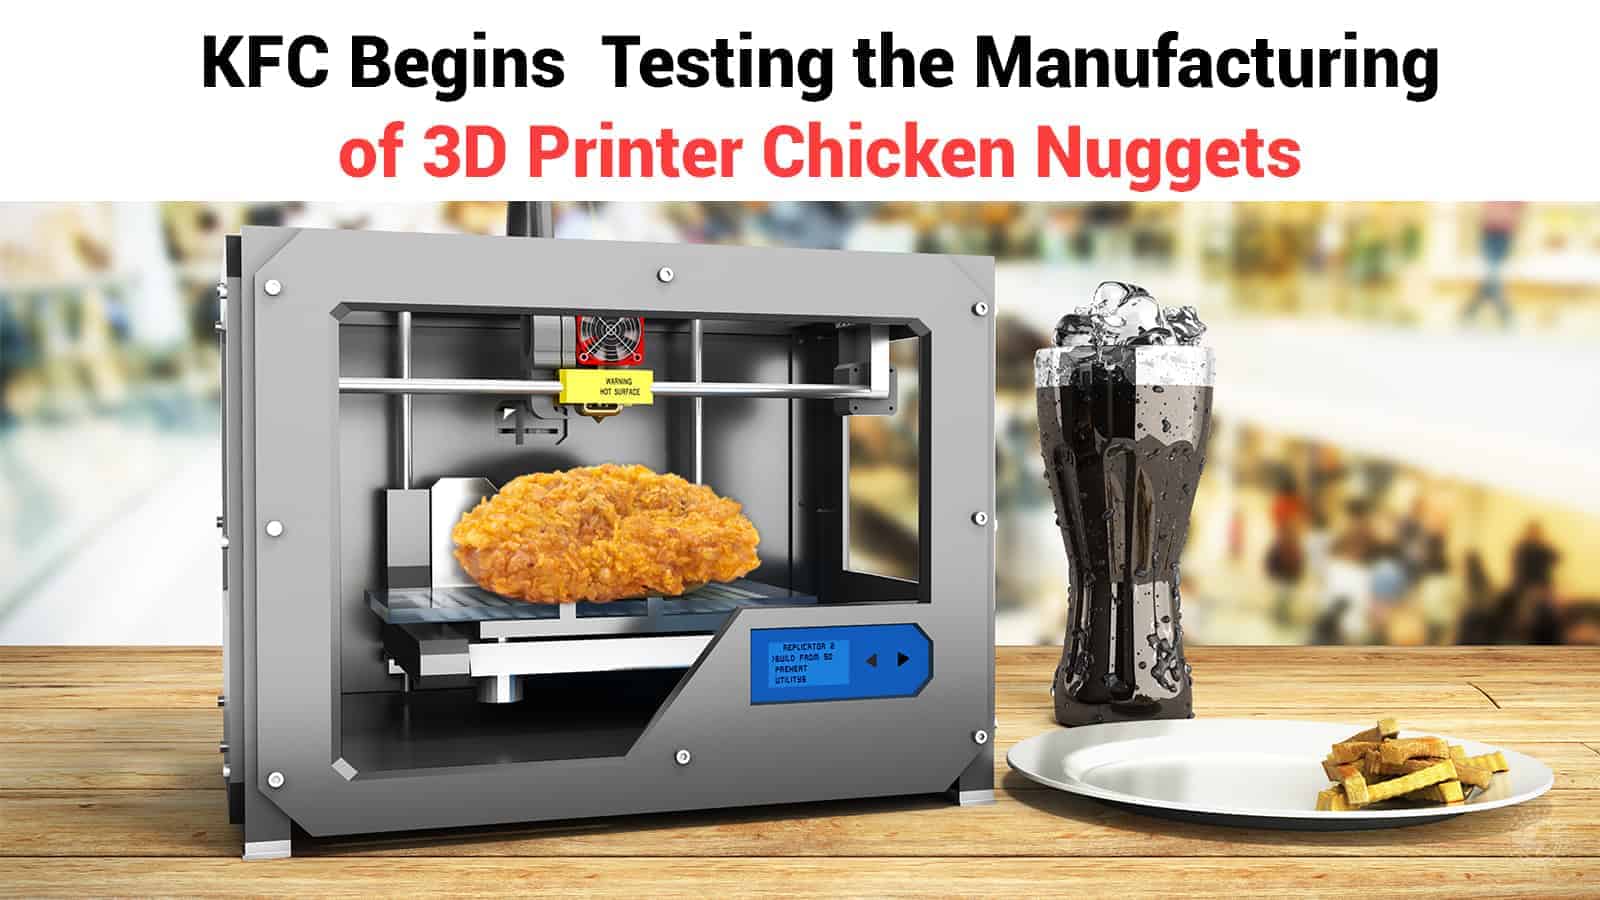  KFC Begins Testing the Manufacturing of 3D Printer Chicken Nuggets